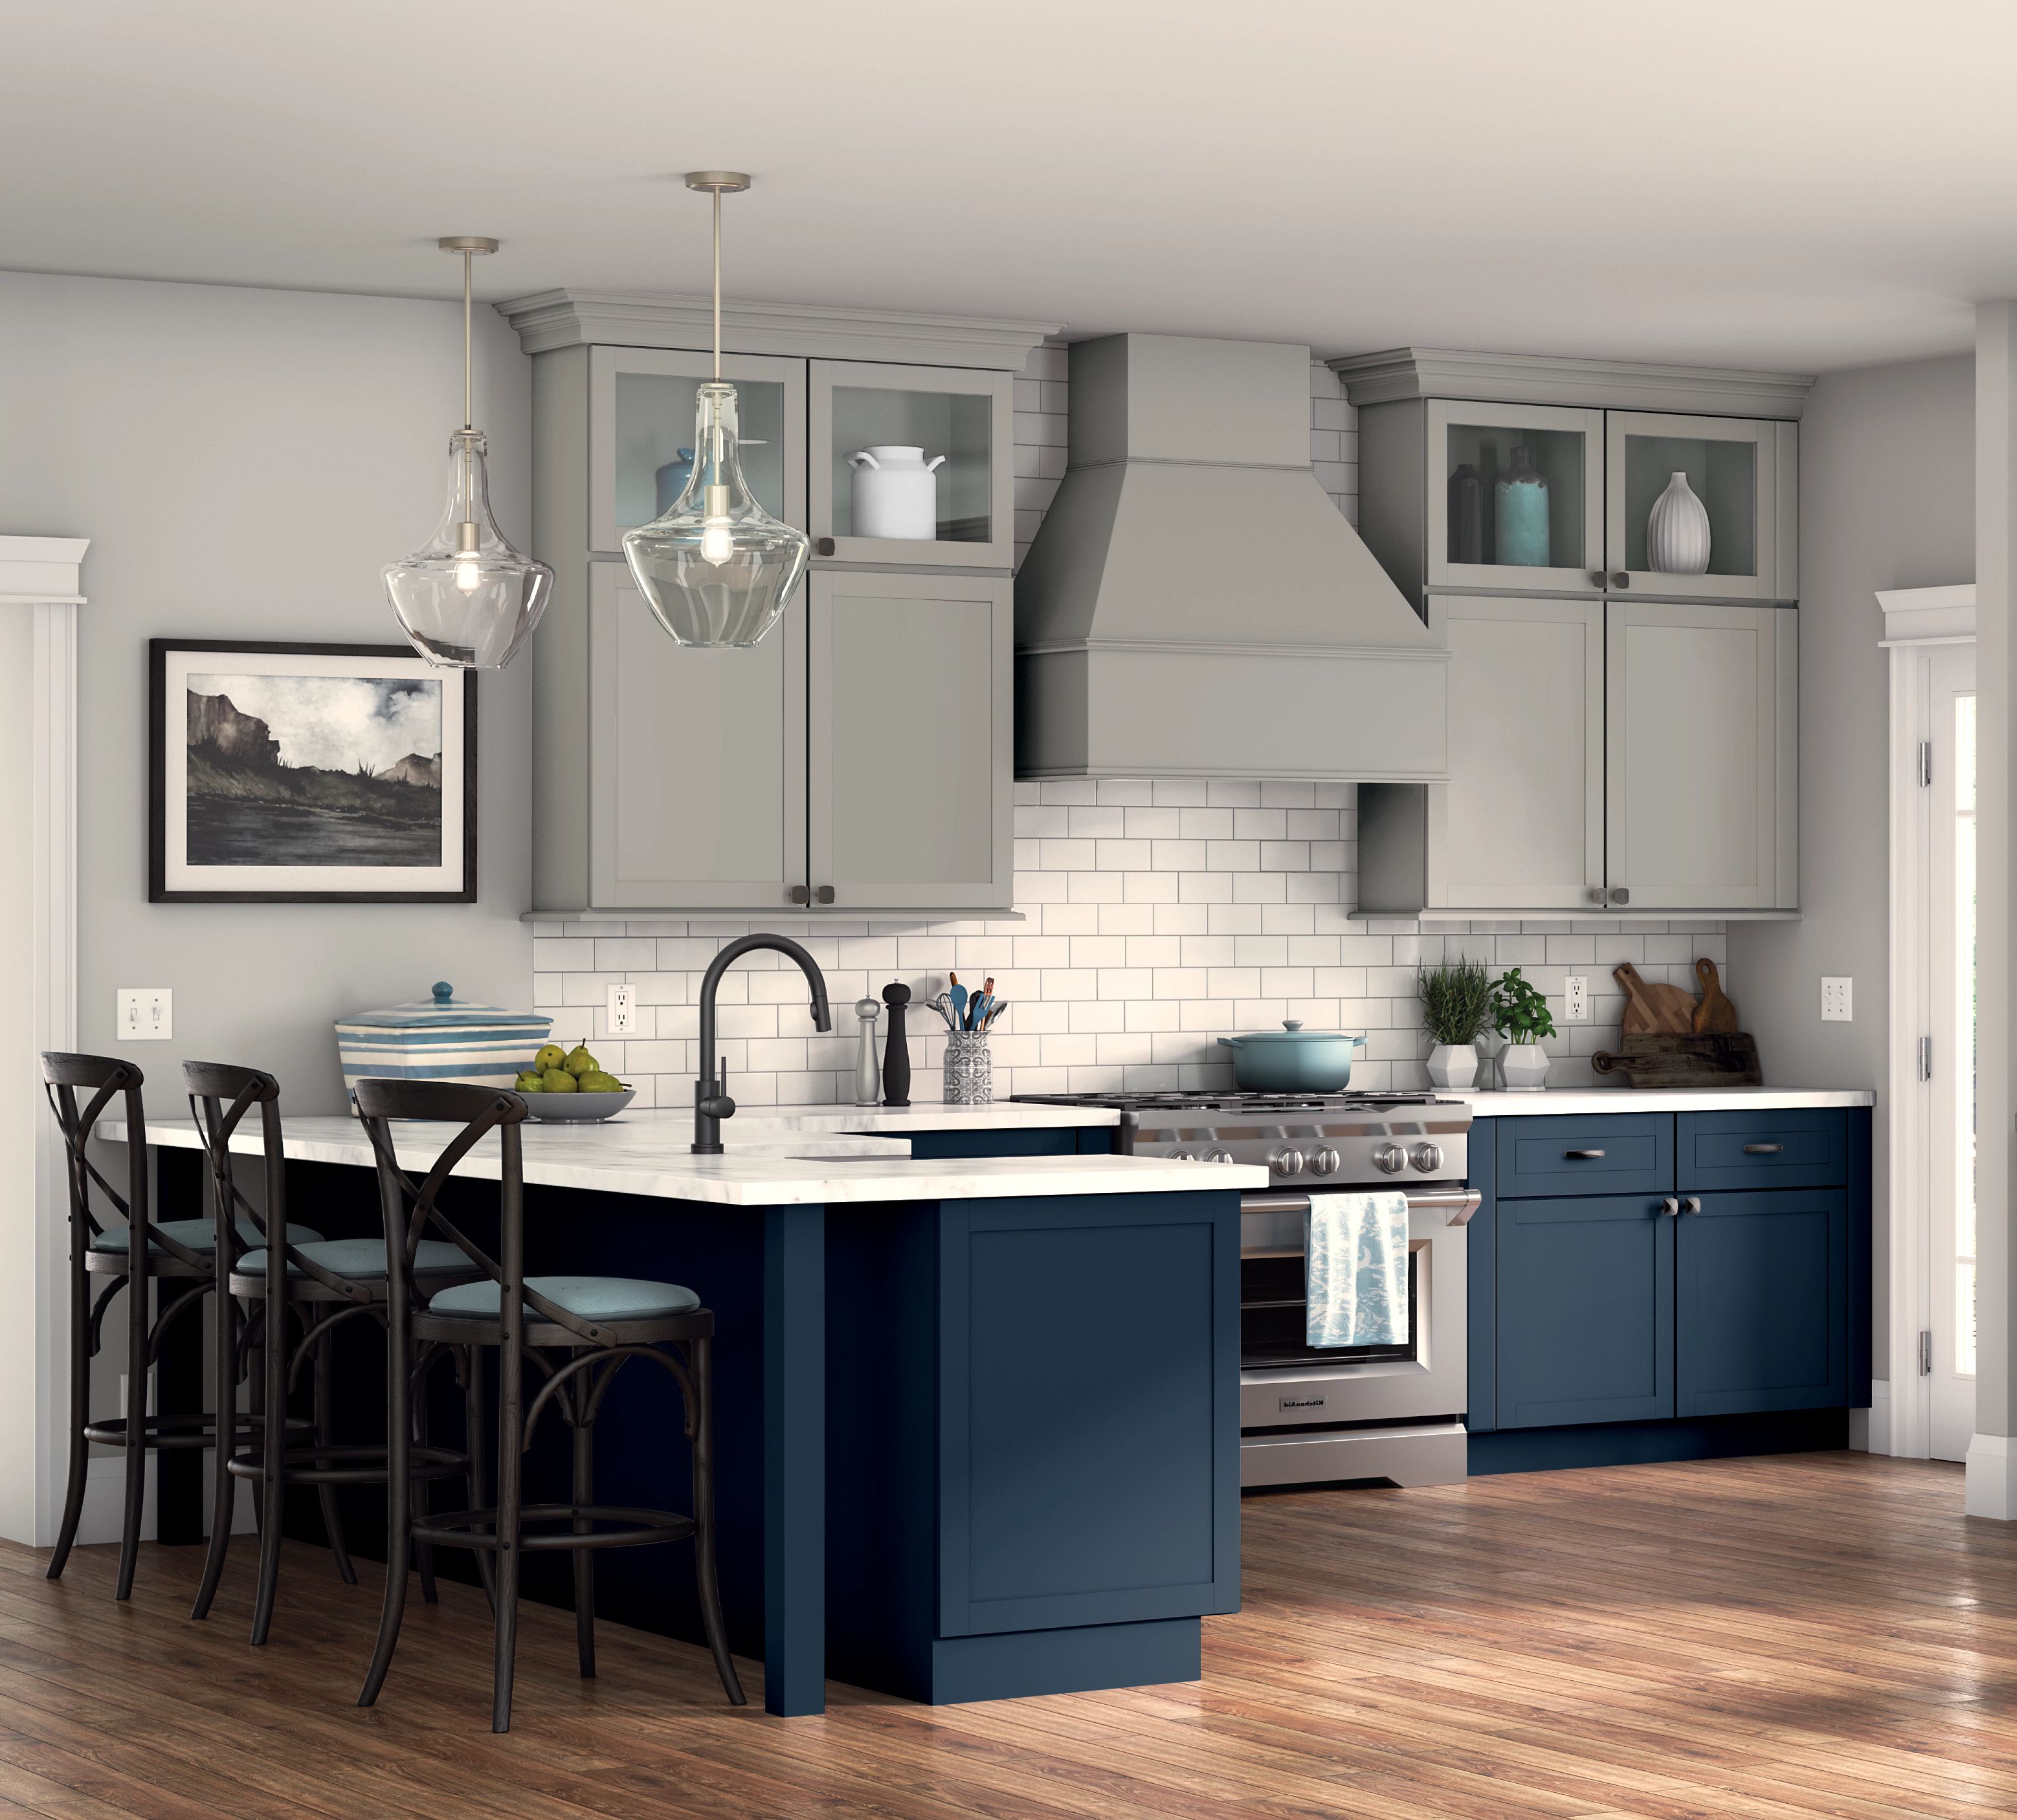 L-shaped KraftMaid kitchen with Shaker-style cabinets in light and dark two-toned painted finish 